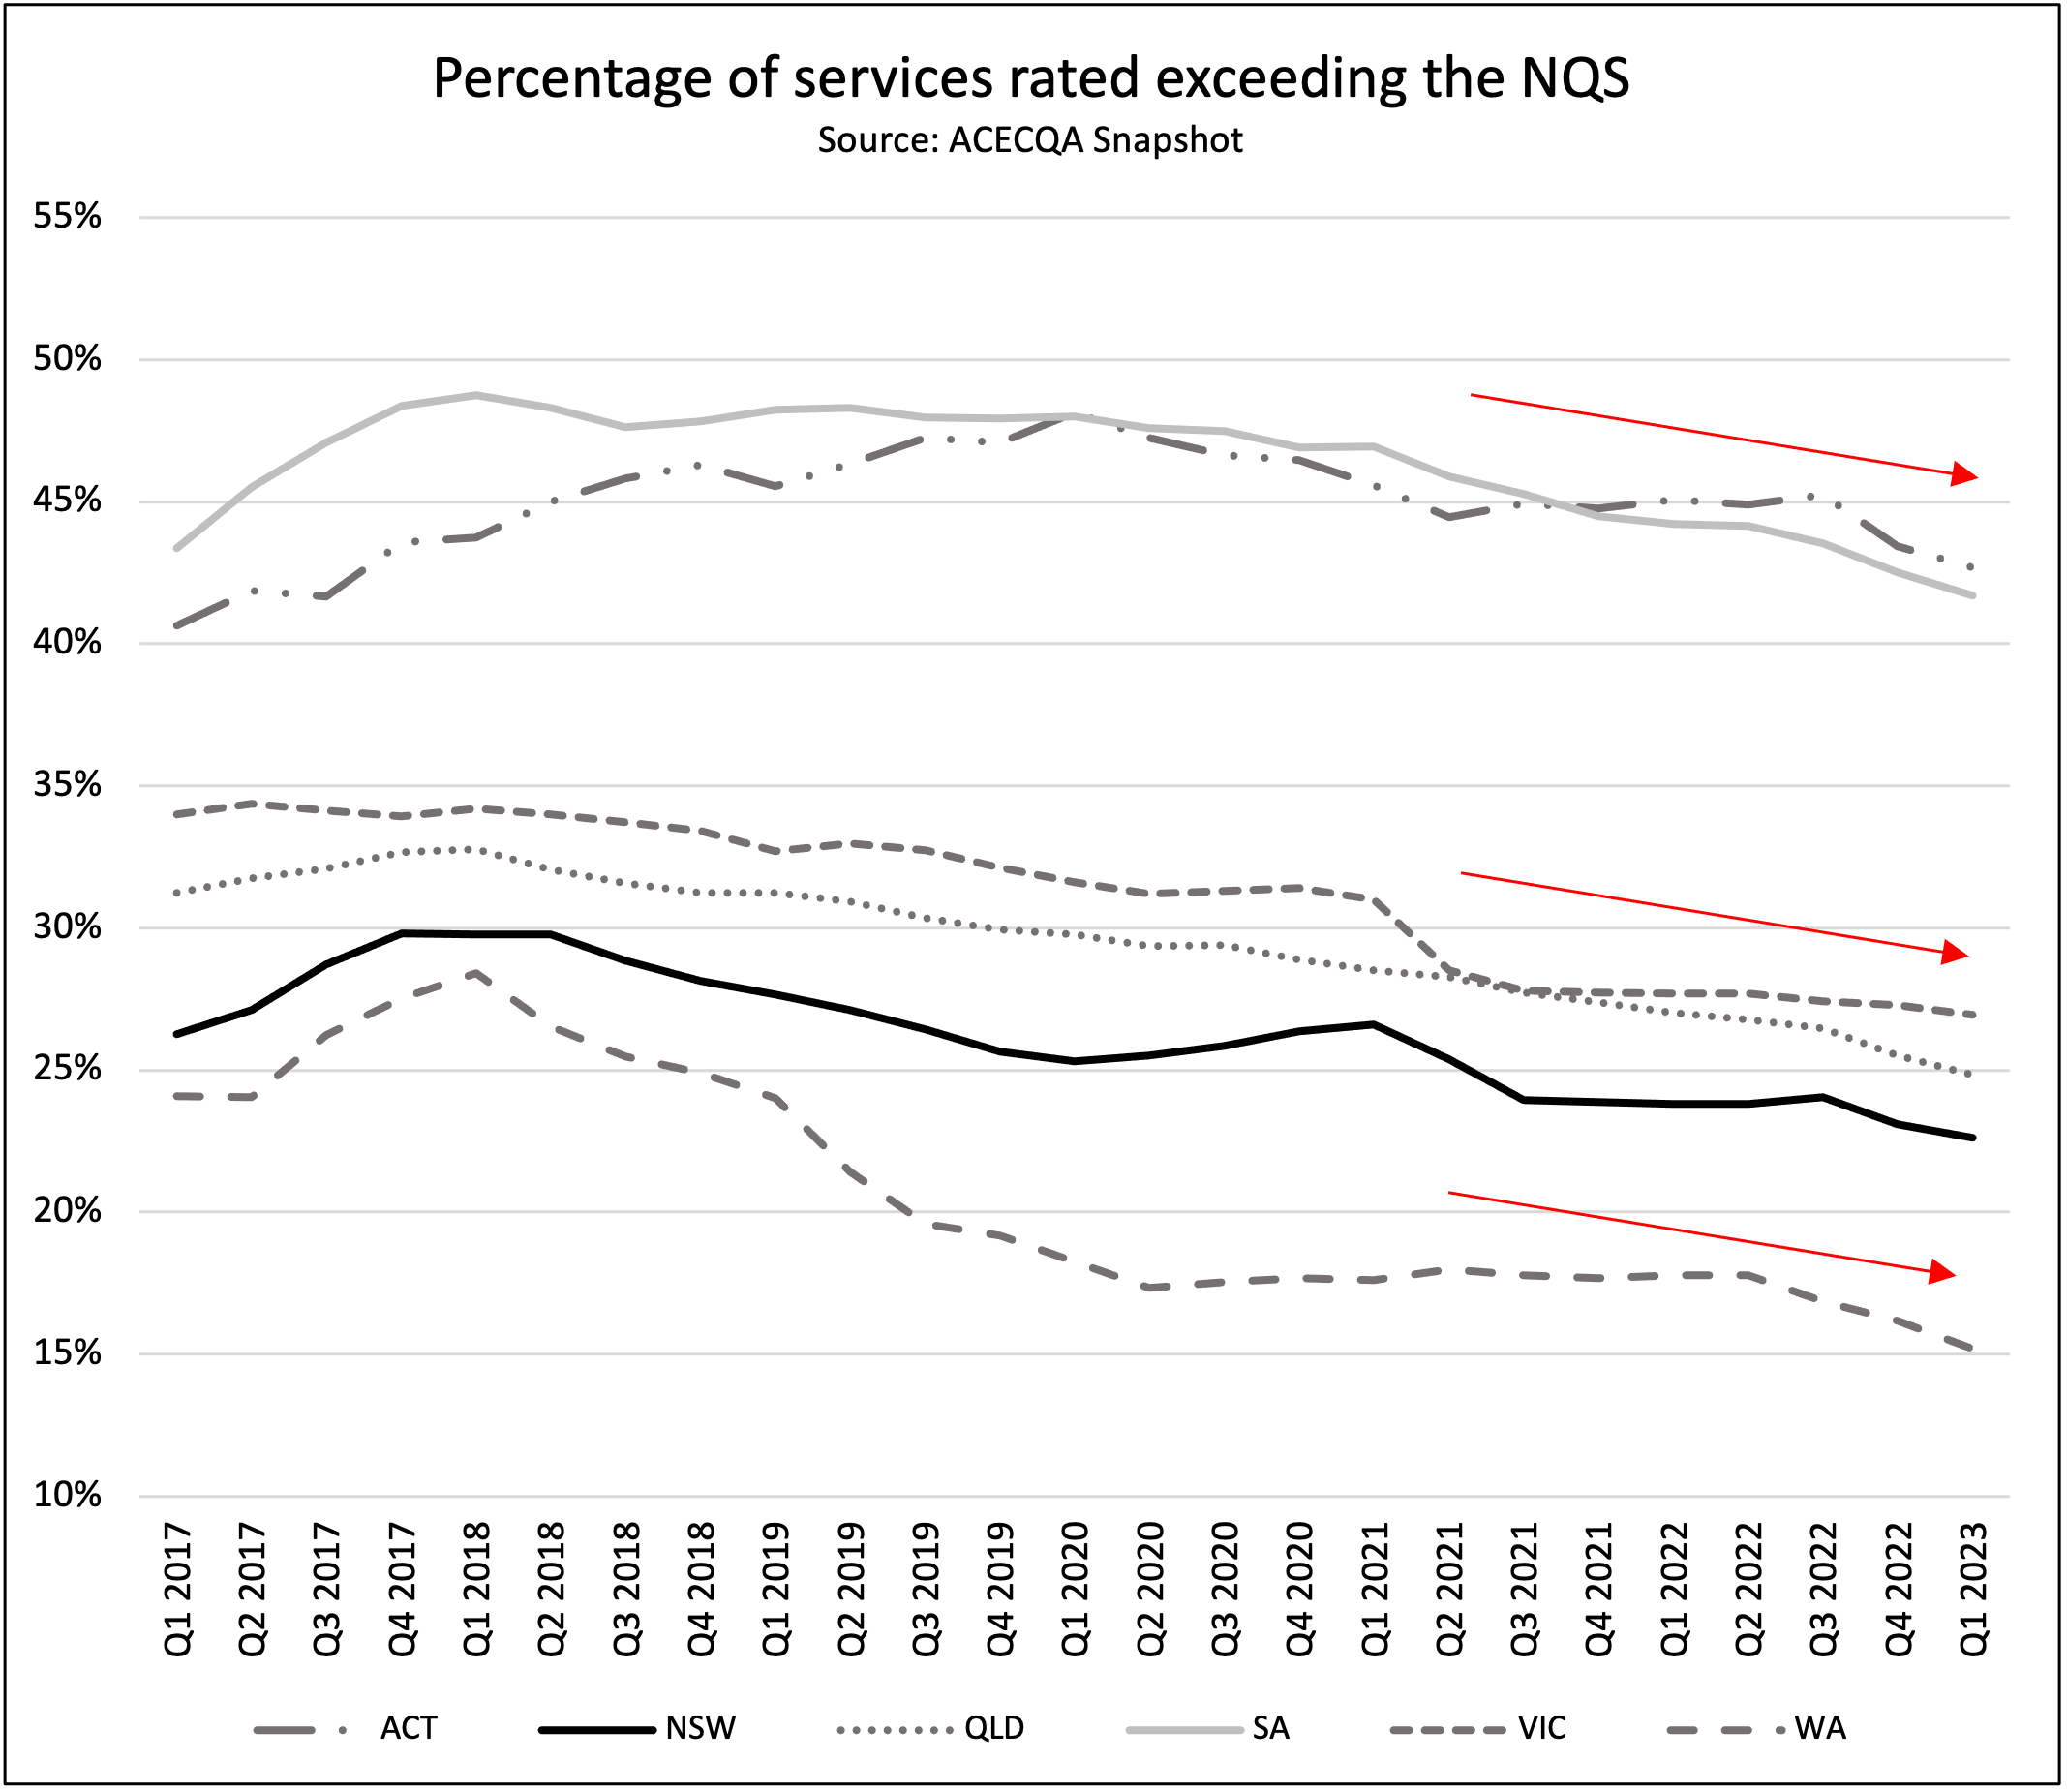 Percentage of services exceeding the NQS